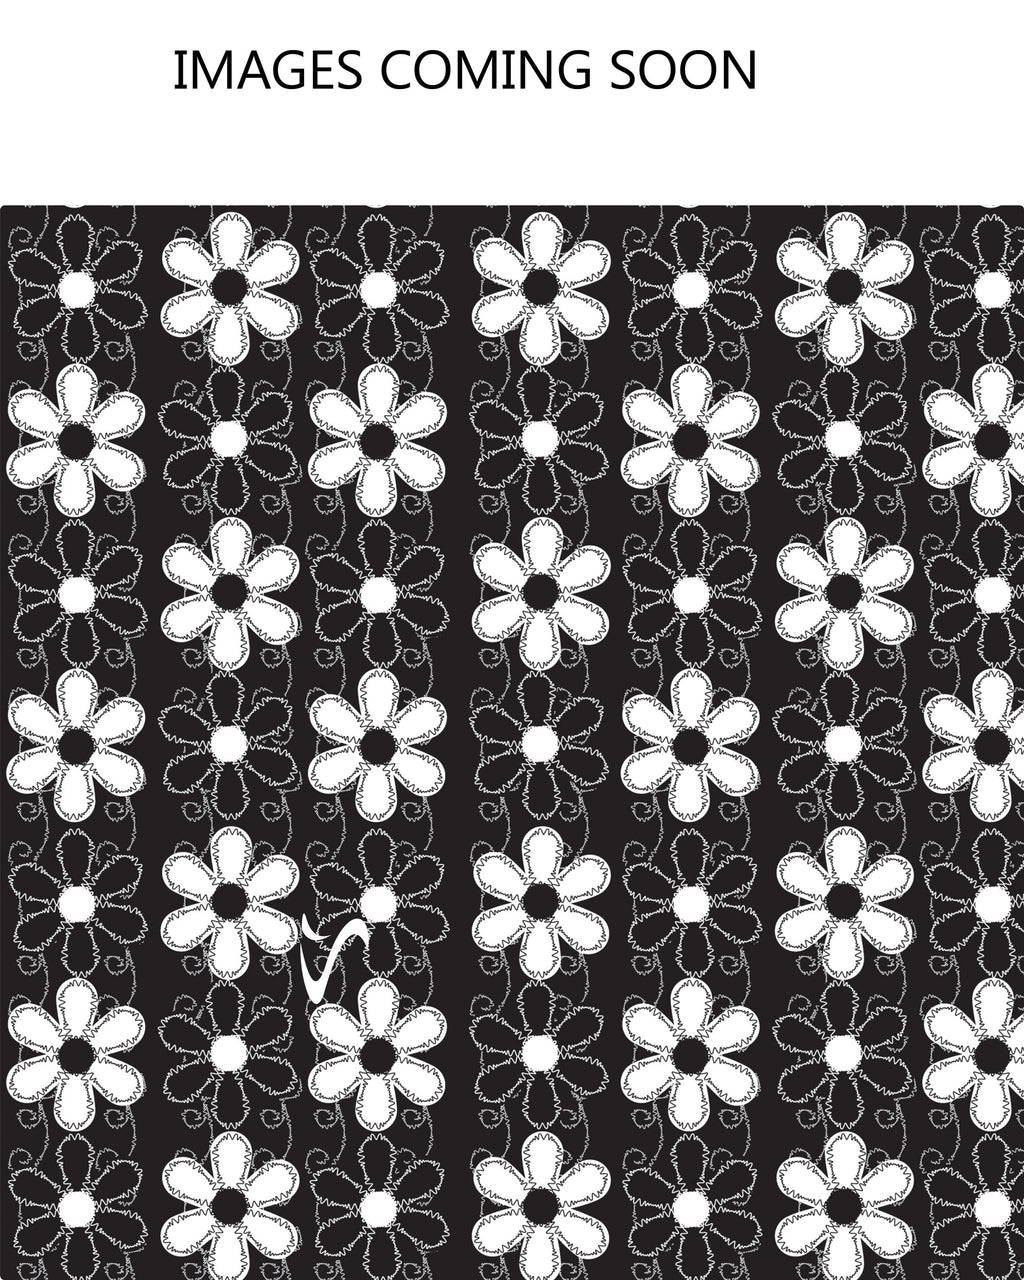 Black leggings with white daisy flowers.  Perfect for women's running, gym and yoga.